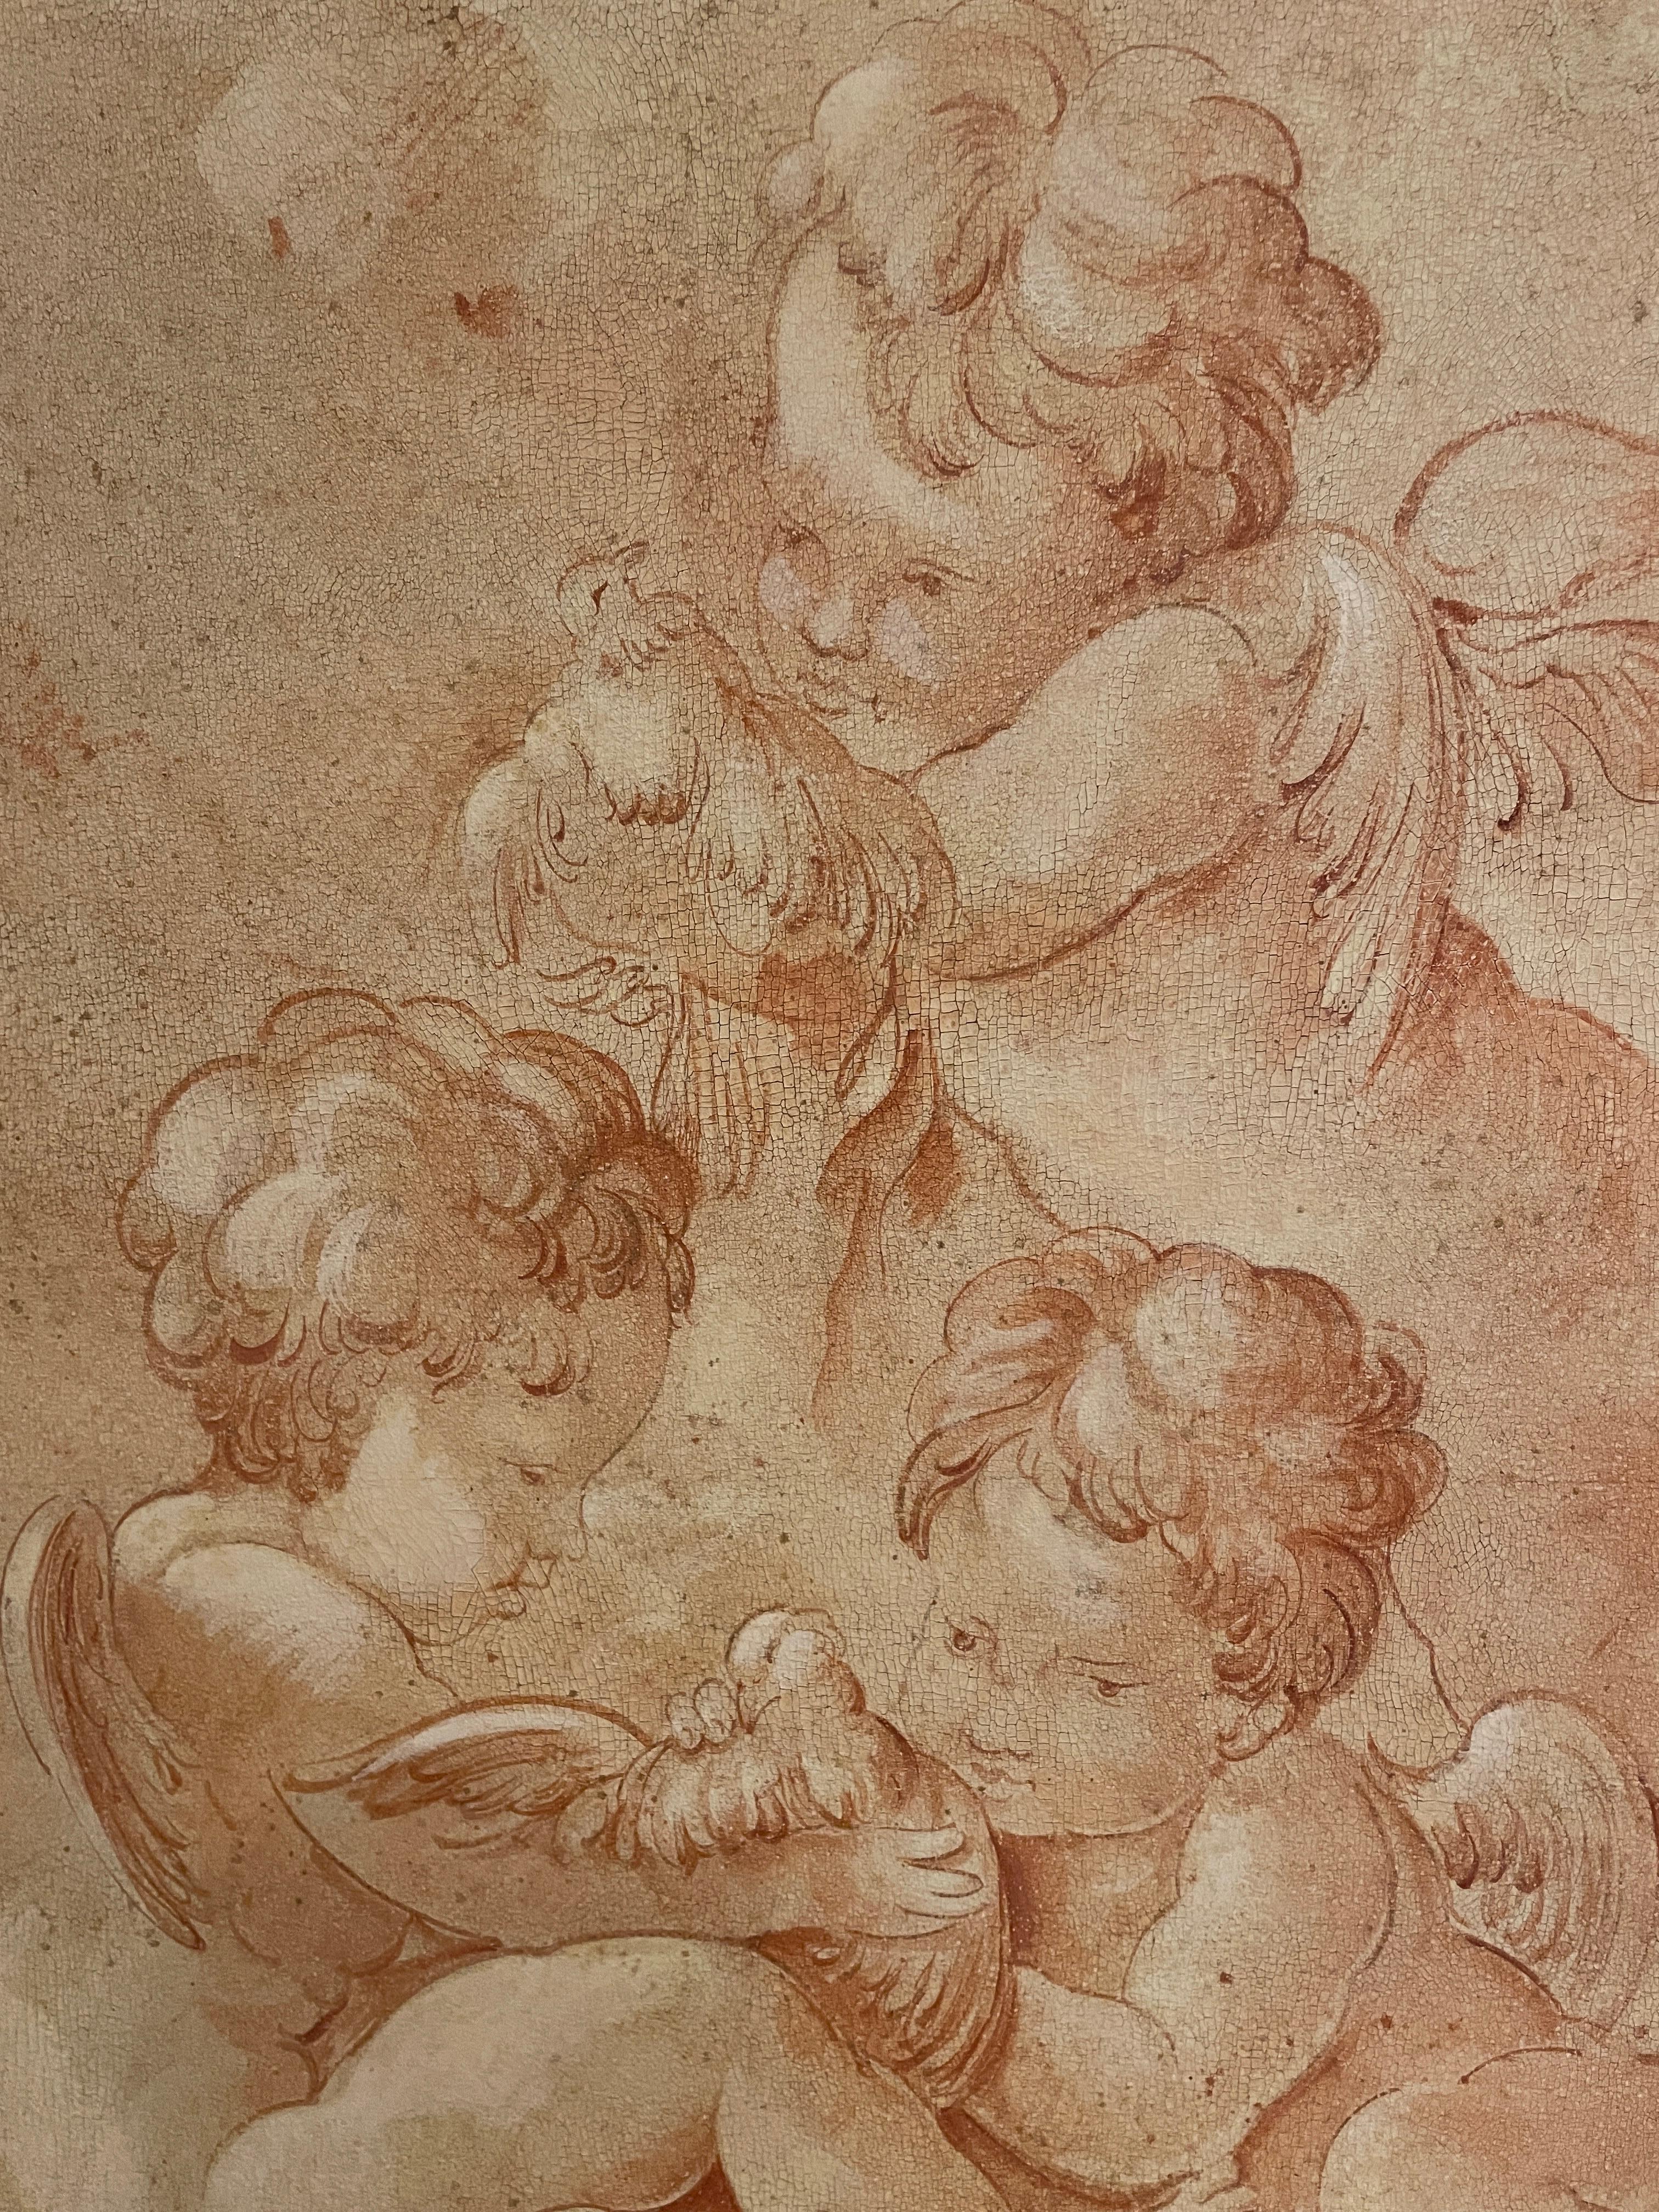 European Pair of Old Master Style Drawings on Canvas